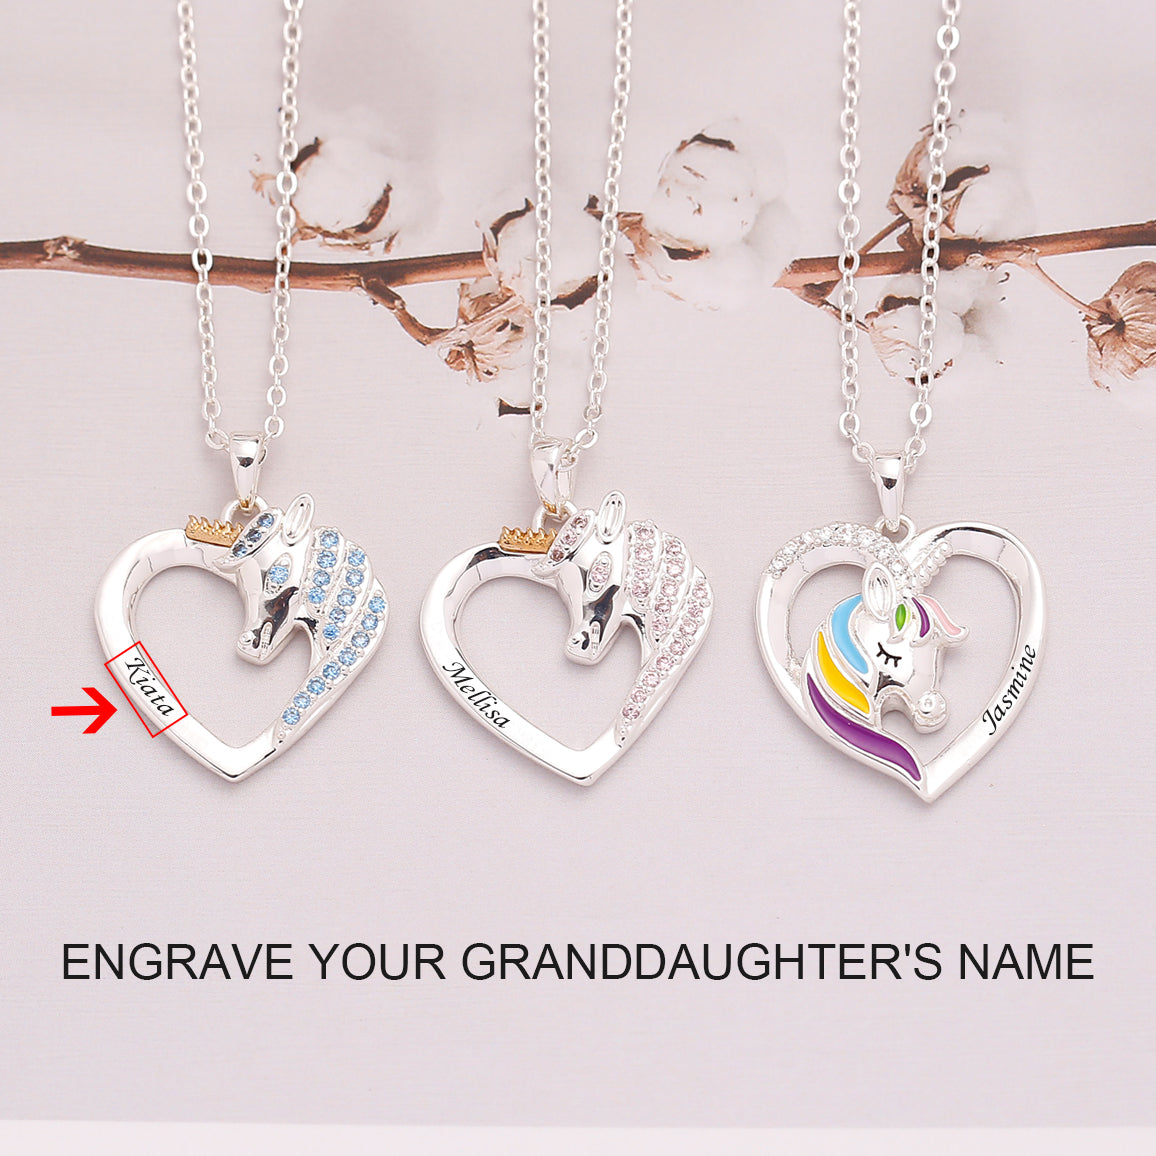 [CUSTOM NAME] To My GRANDDAUGHTER "Never forget how much I love you as you grow older" Unicorn Necklace - SARAH'S WHISPER